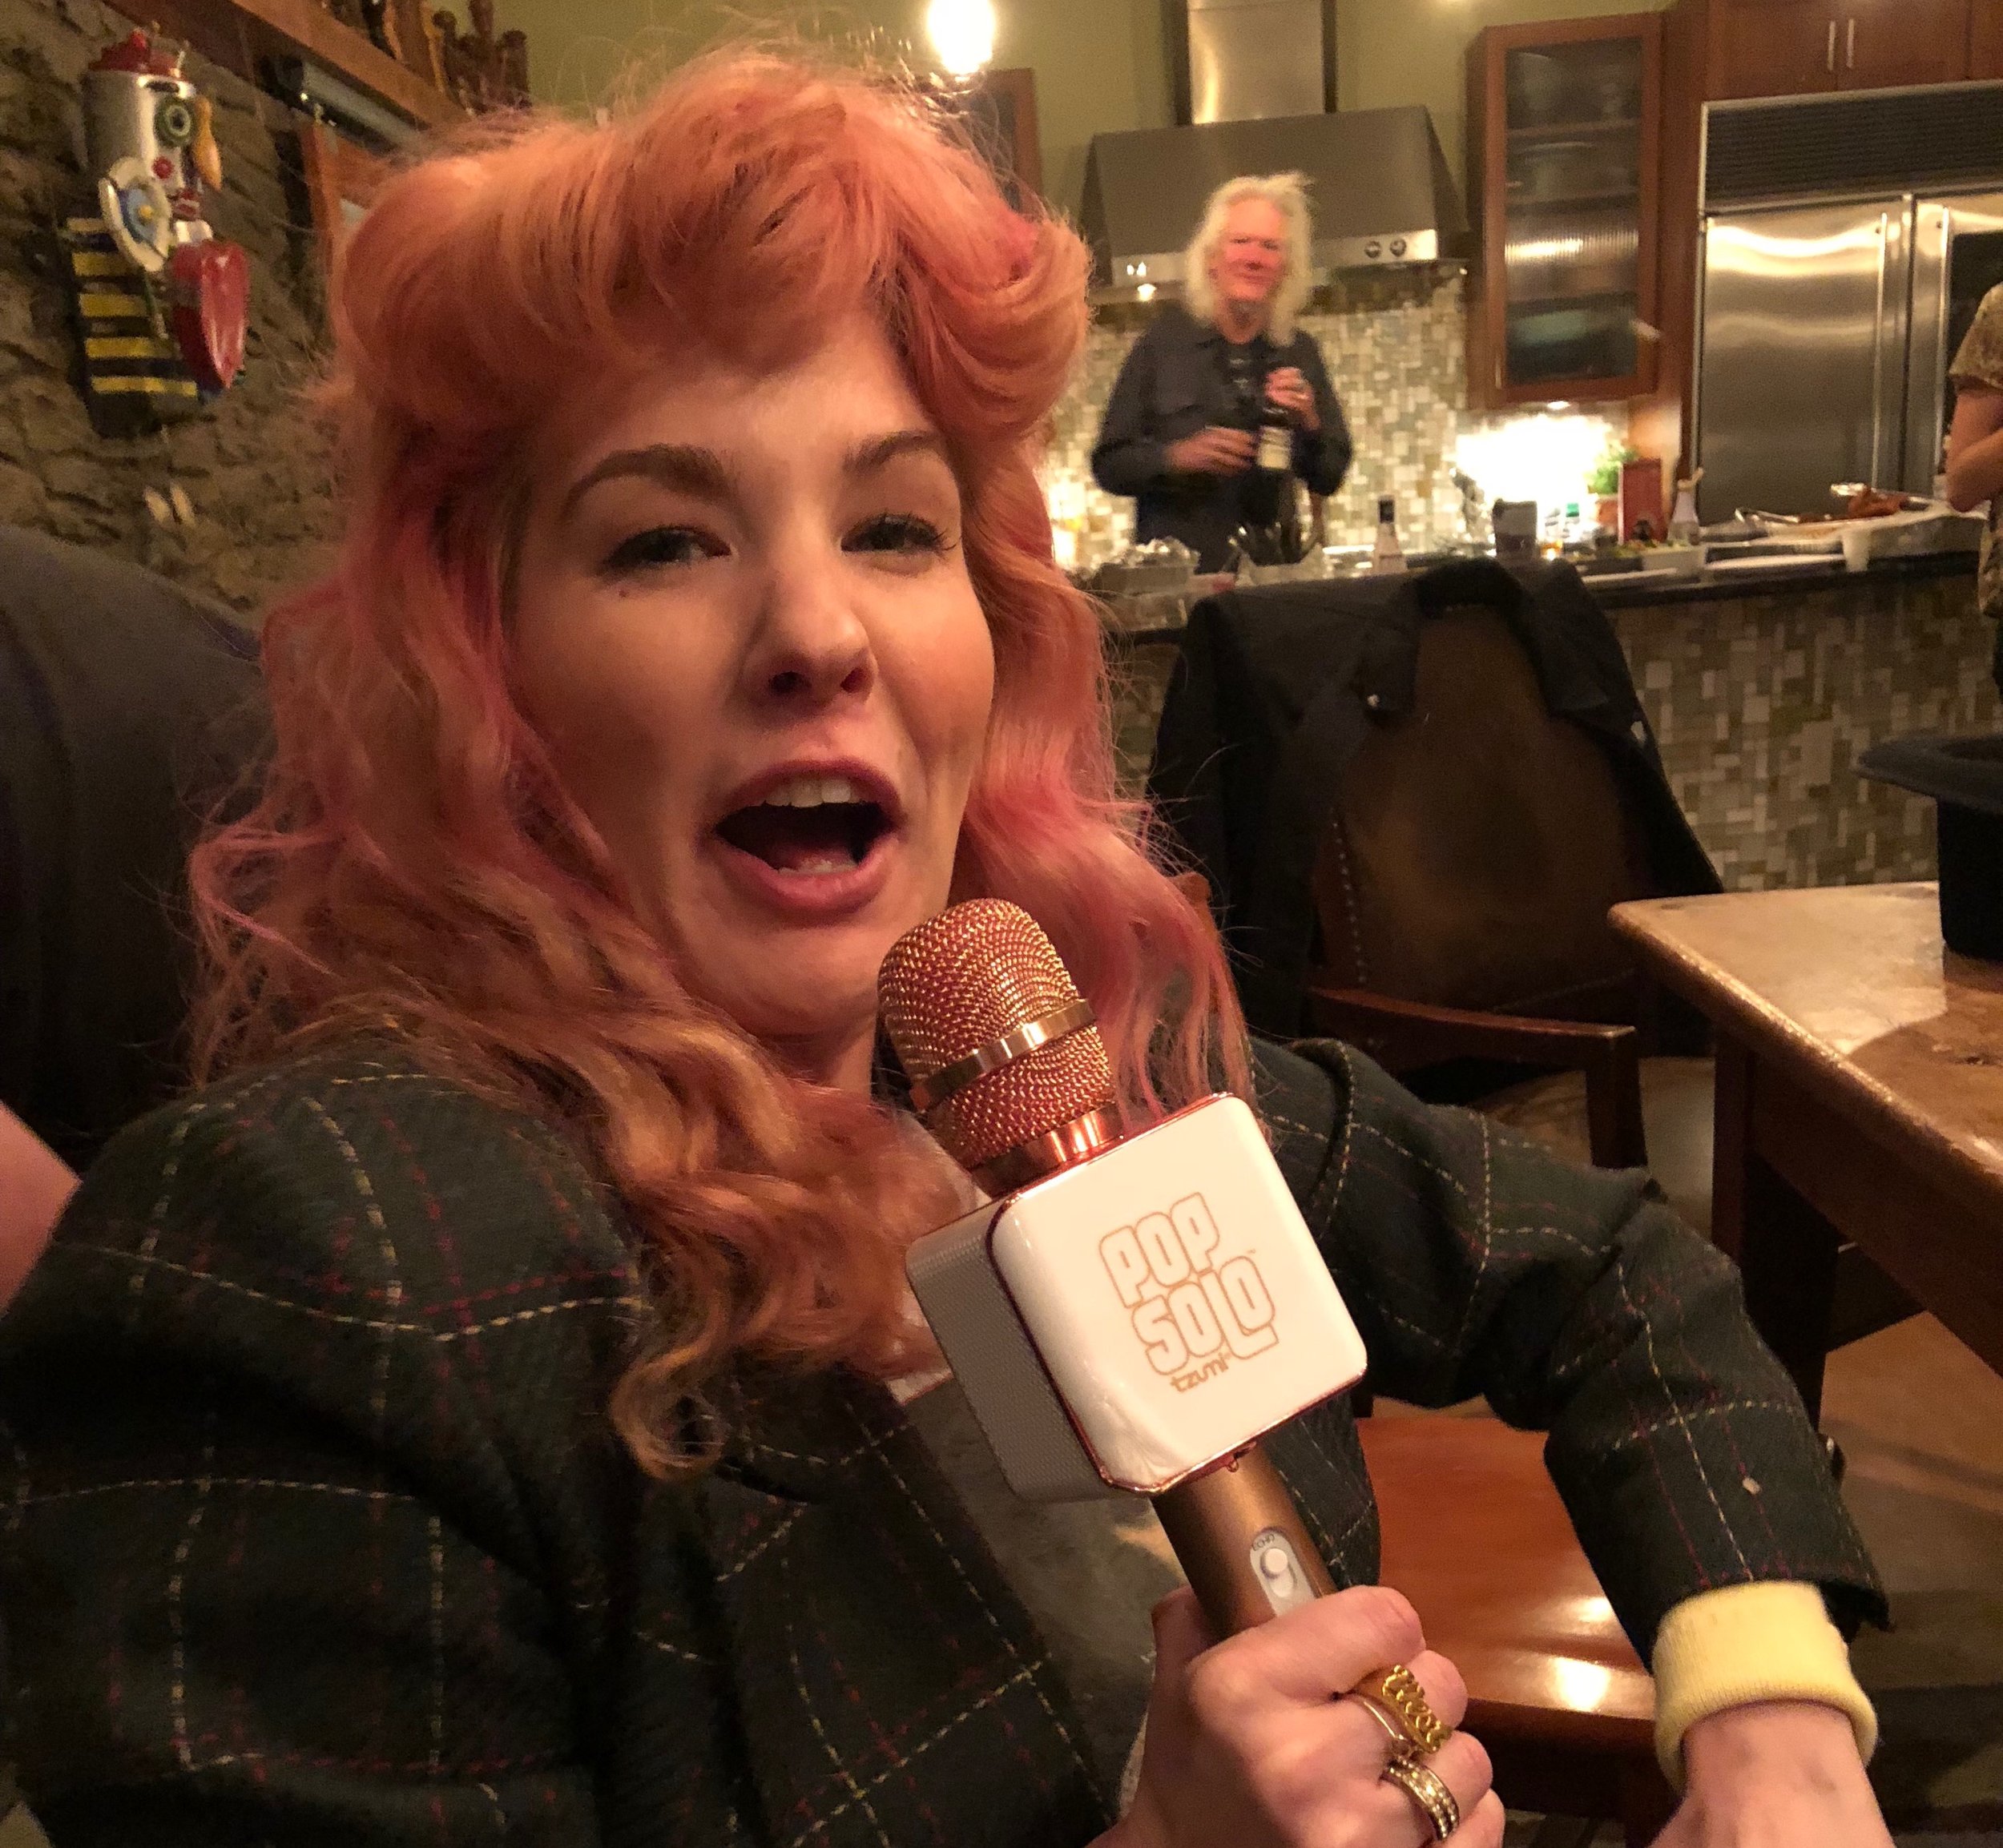  Check out her $19.99 Pop Solo mic! I need one of these too! (That's Skip in the back). 